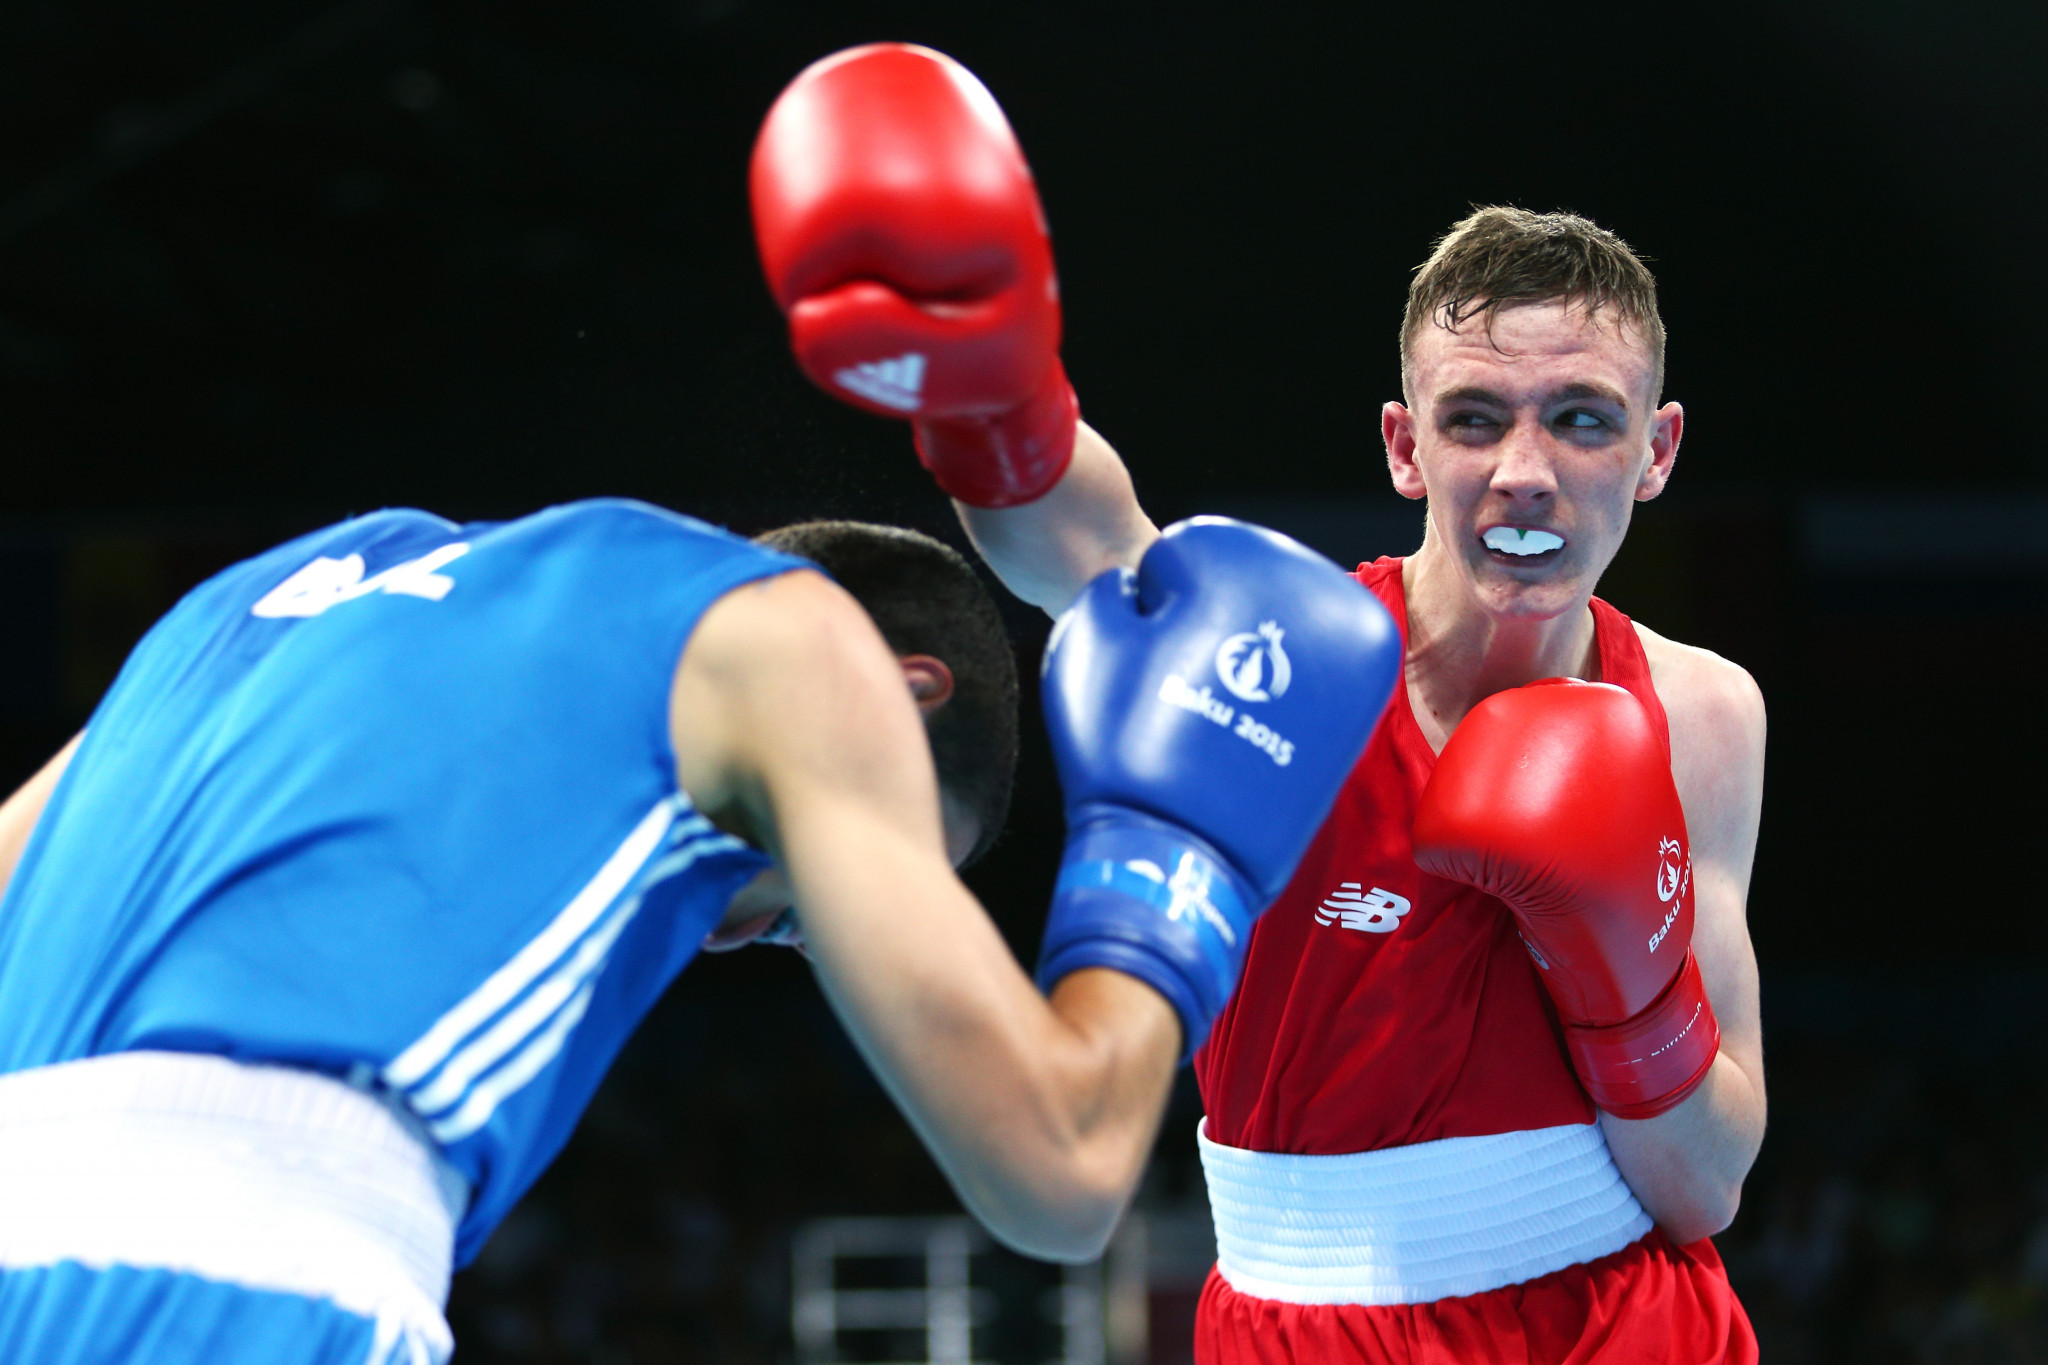 European Games boxing silver medallist Irvine ruled out of Minsk 2019 with broken foot